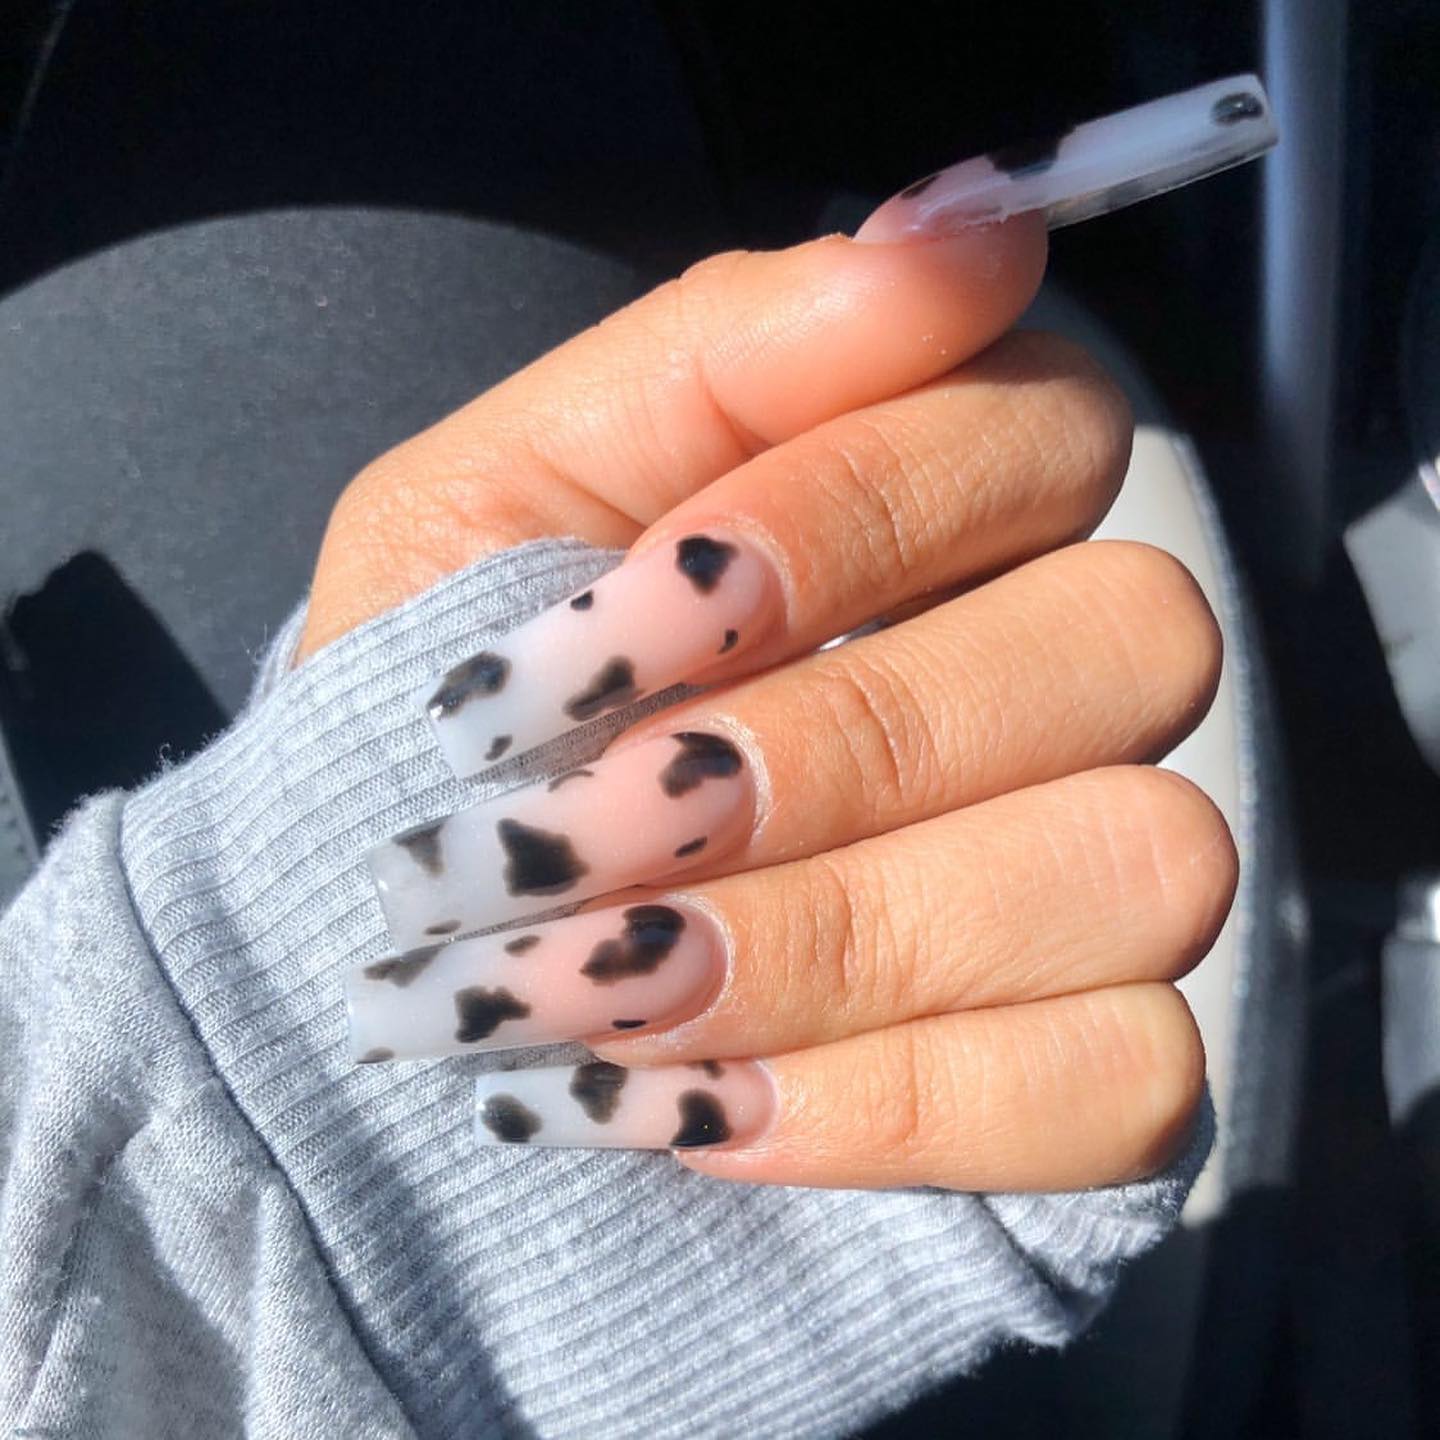 Black and white cow print acrylic nails are a fun and unique way to add some flair to your hands. They're also easy to do, so if you're looking for something fun, these might be a good choice!